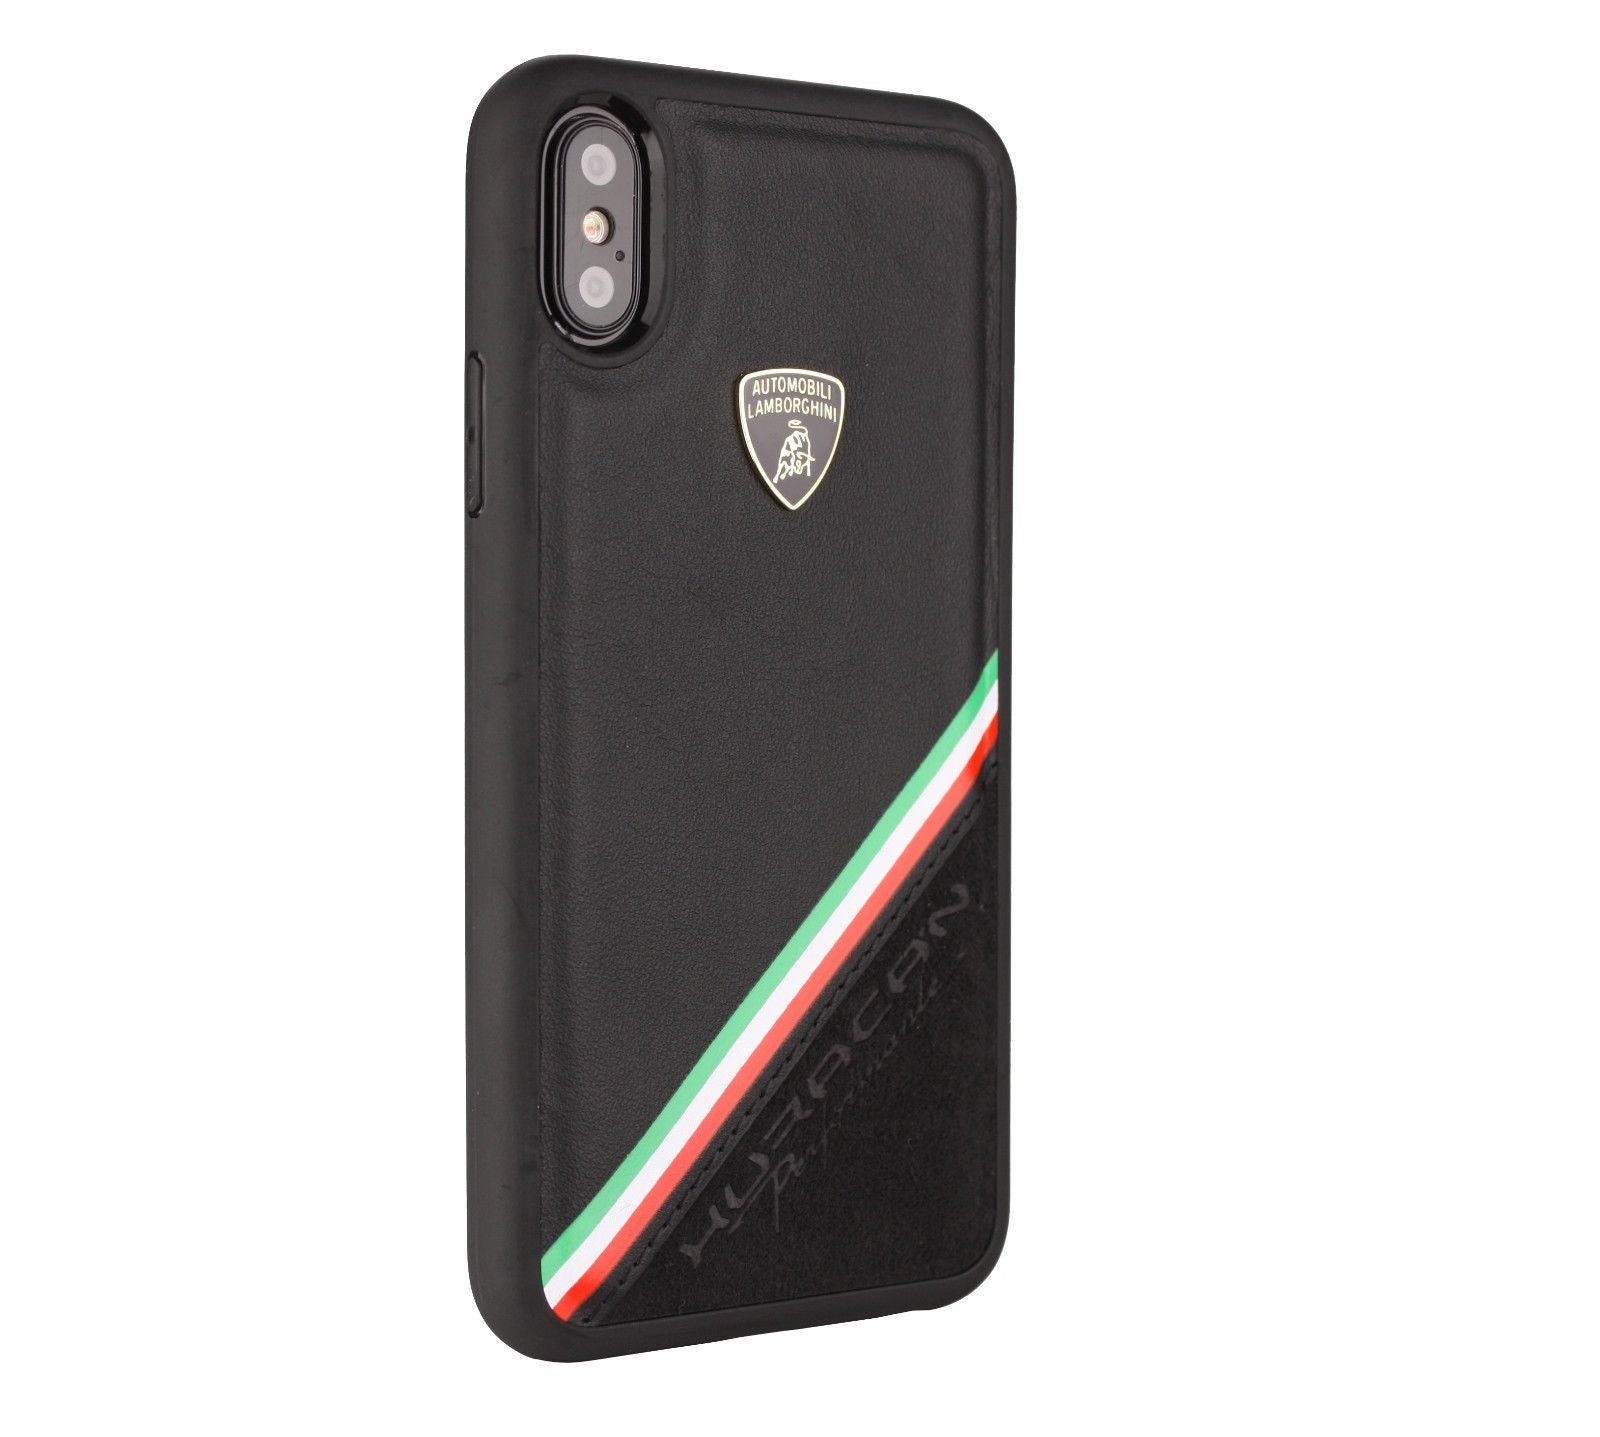 Luxury Genuine Leather & Carbon Fiber Hybrid Official Lamborghini Huracan D11 Series Drop Protection Back Case Cover for Apple iPhone X / XS 2018